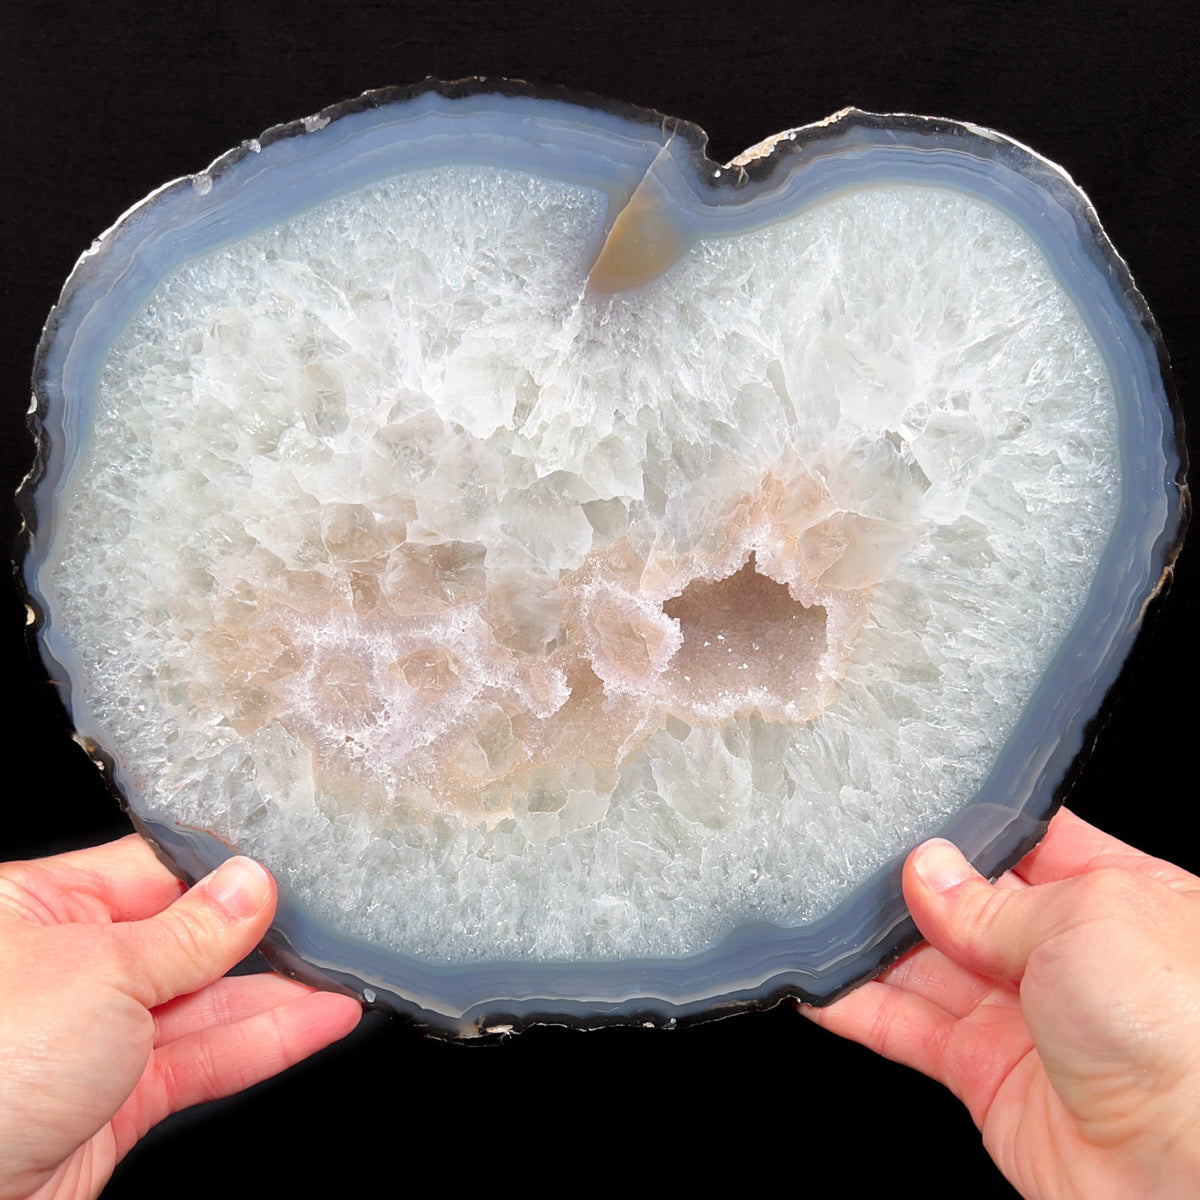 Large Drusy Quartz and Chalcedony Geode Slab from Brazil